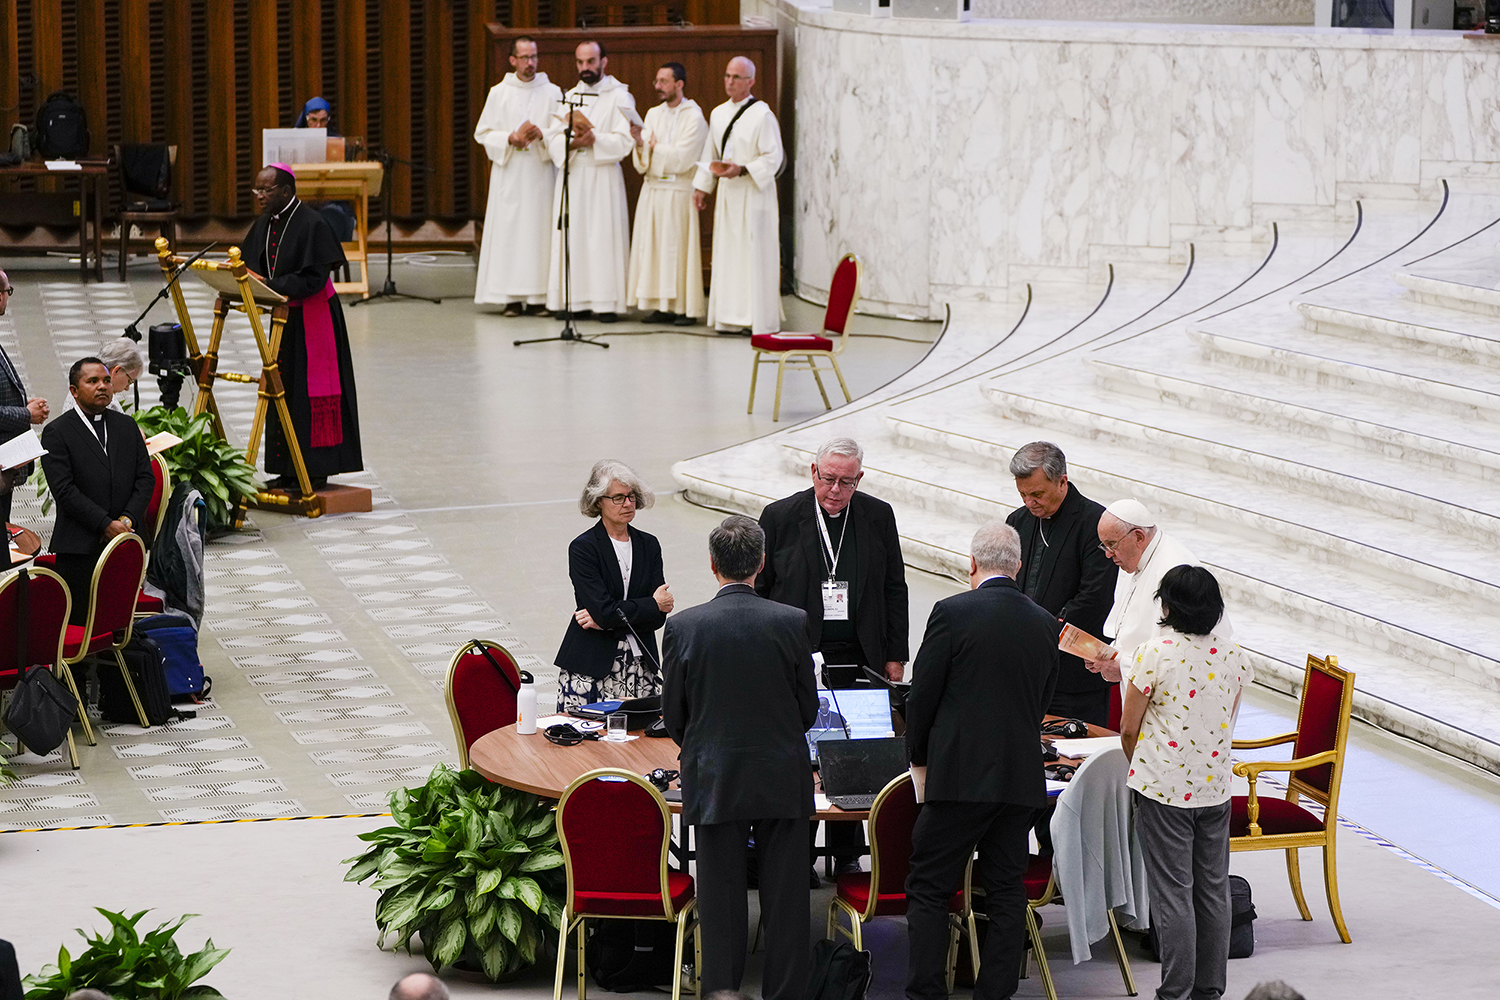 From left foreground front to camera, Sister Nathalie Becquart, Synod of Bishop's Rapporteur Cardinal Jean-Claude Hollerich, Synod of Bishops' Secretary General Cardinal Mario Grech, attend with Pope Francis a session of the 16th general assembly of the synod of bishops in the Paul VI Hall at The Vatican, Monday, Oct. 16, 2023. (AP Photo/Domenico Stinellis)